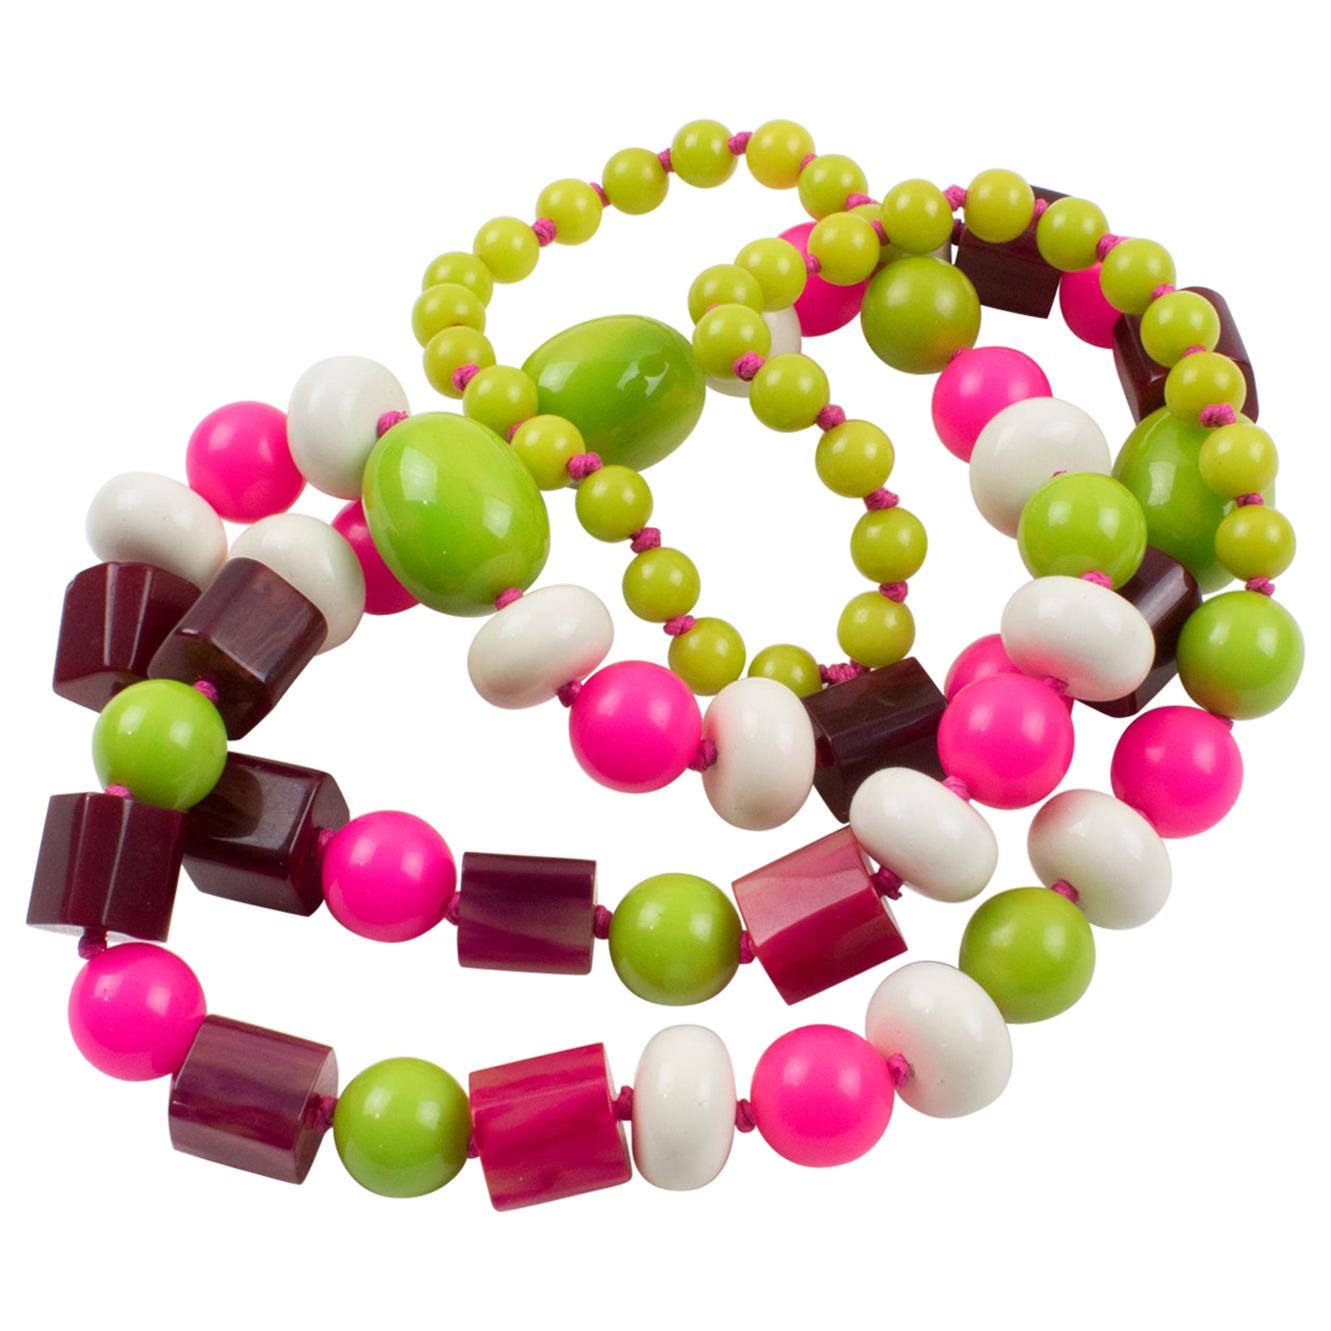 Bakelite and Lucite Long Necklace White, Hot Pink, Apple Green Beads For Sale